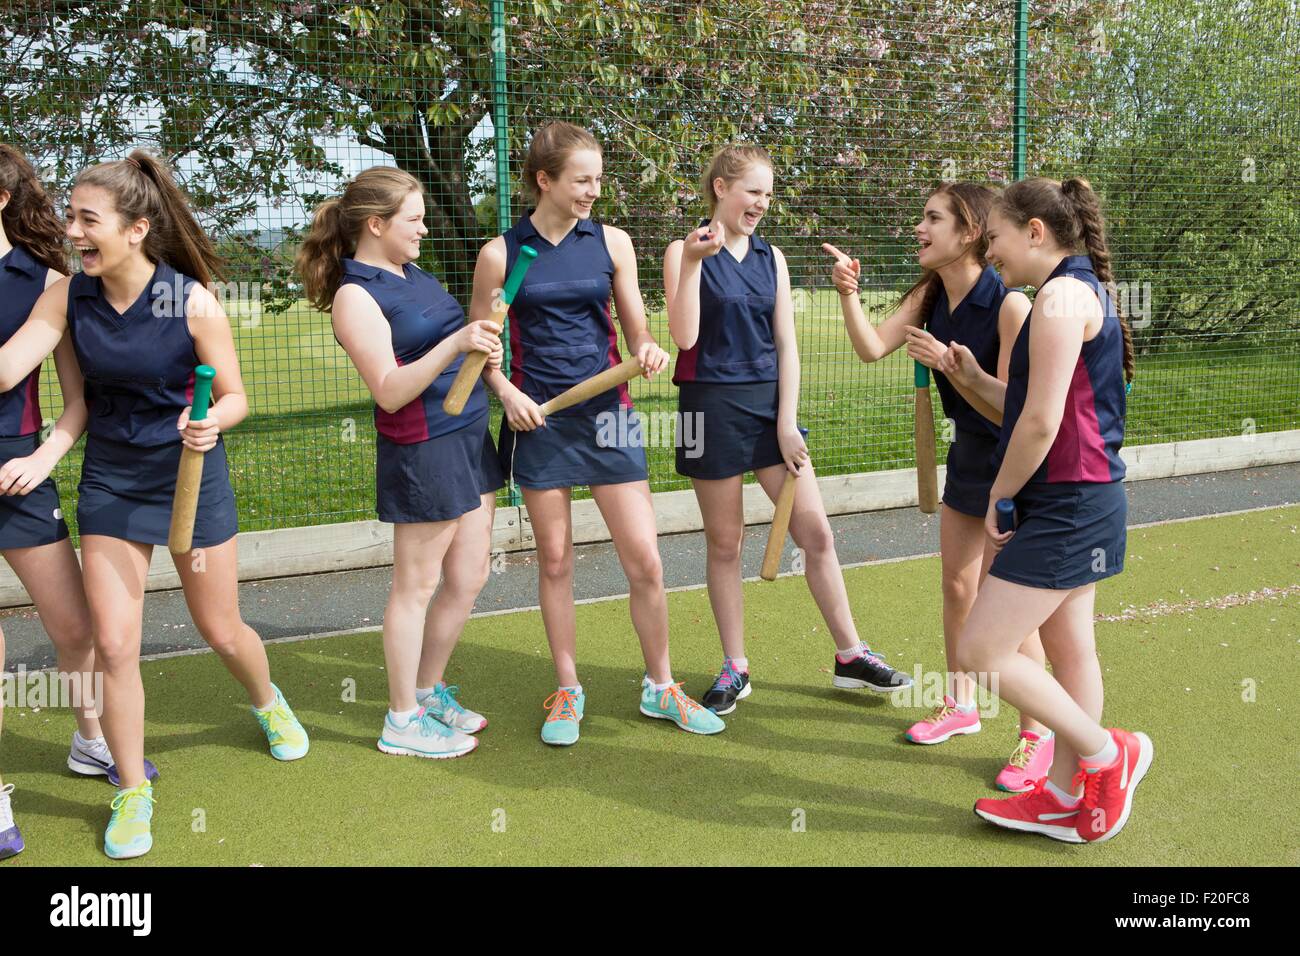 Group of girls on sports fields with rounders bats Stock Photo